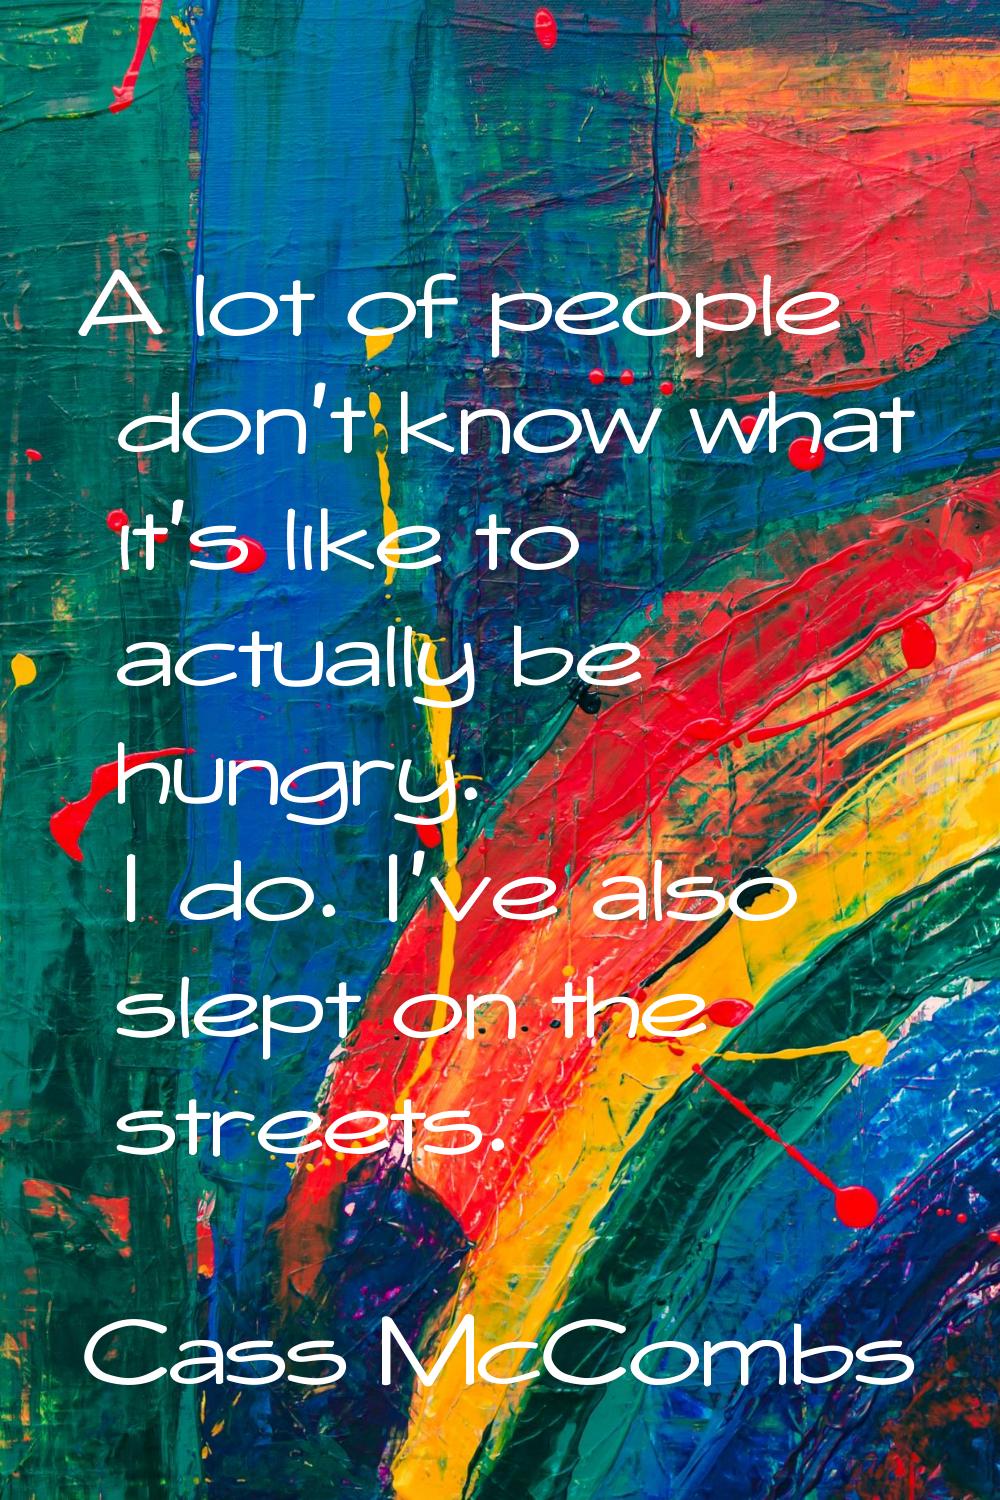 A lot of people don't know what it's like to actually be hungry. I do. I've also slept on the stree